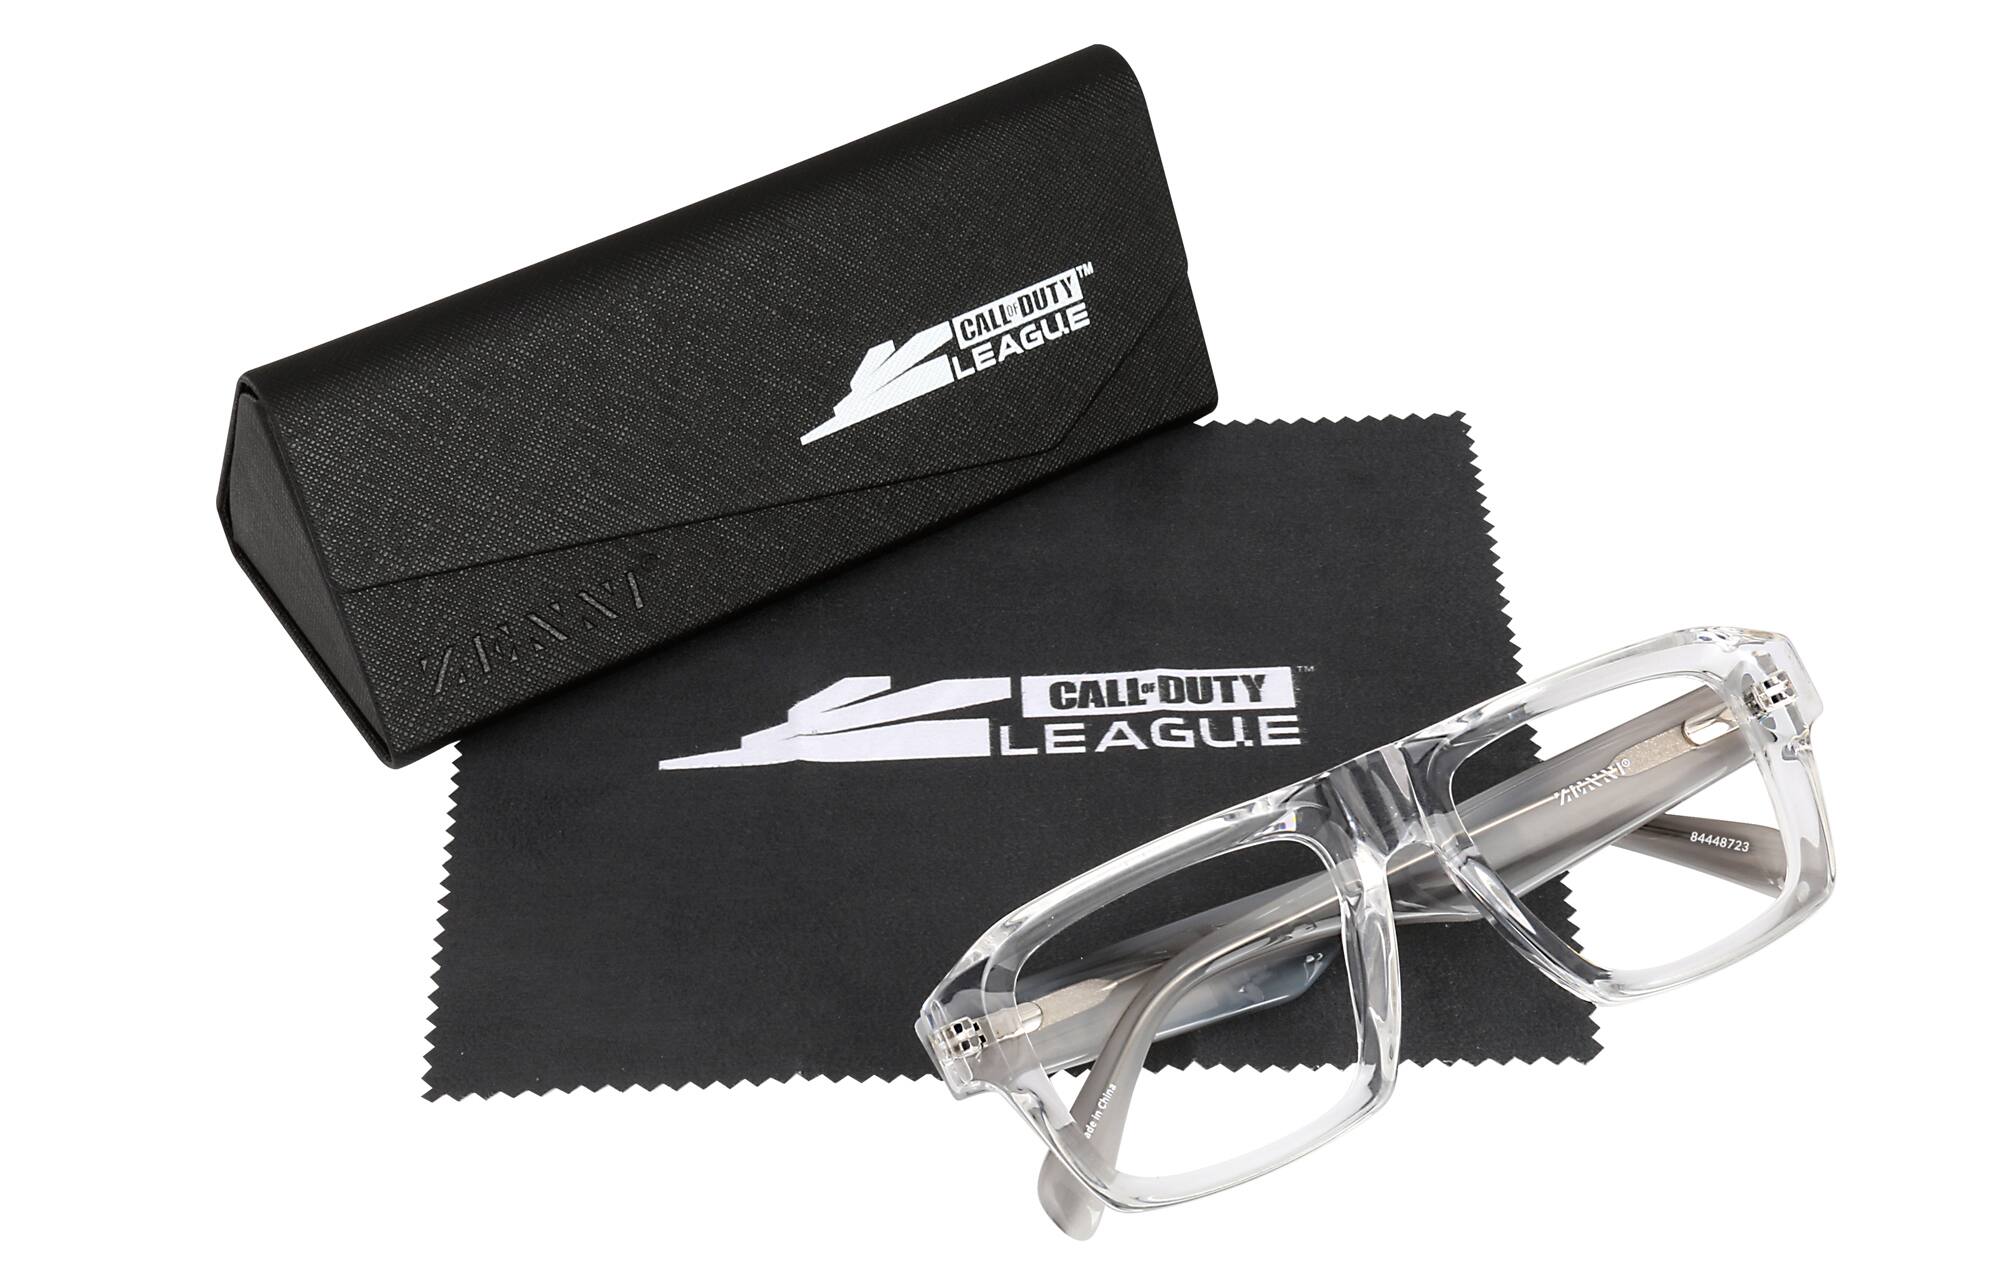 Image of Call of Duty League x Zenni collaboration case and cloth, with clear square Call of Duty League glasses #84448723.